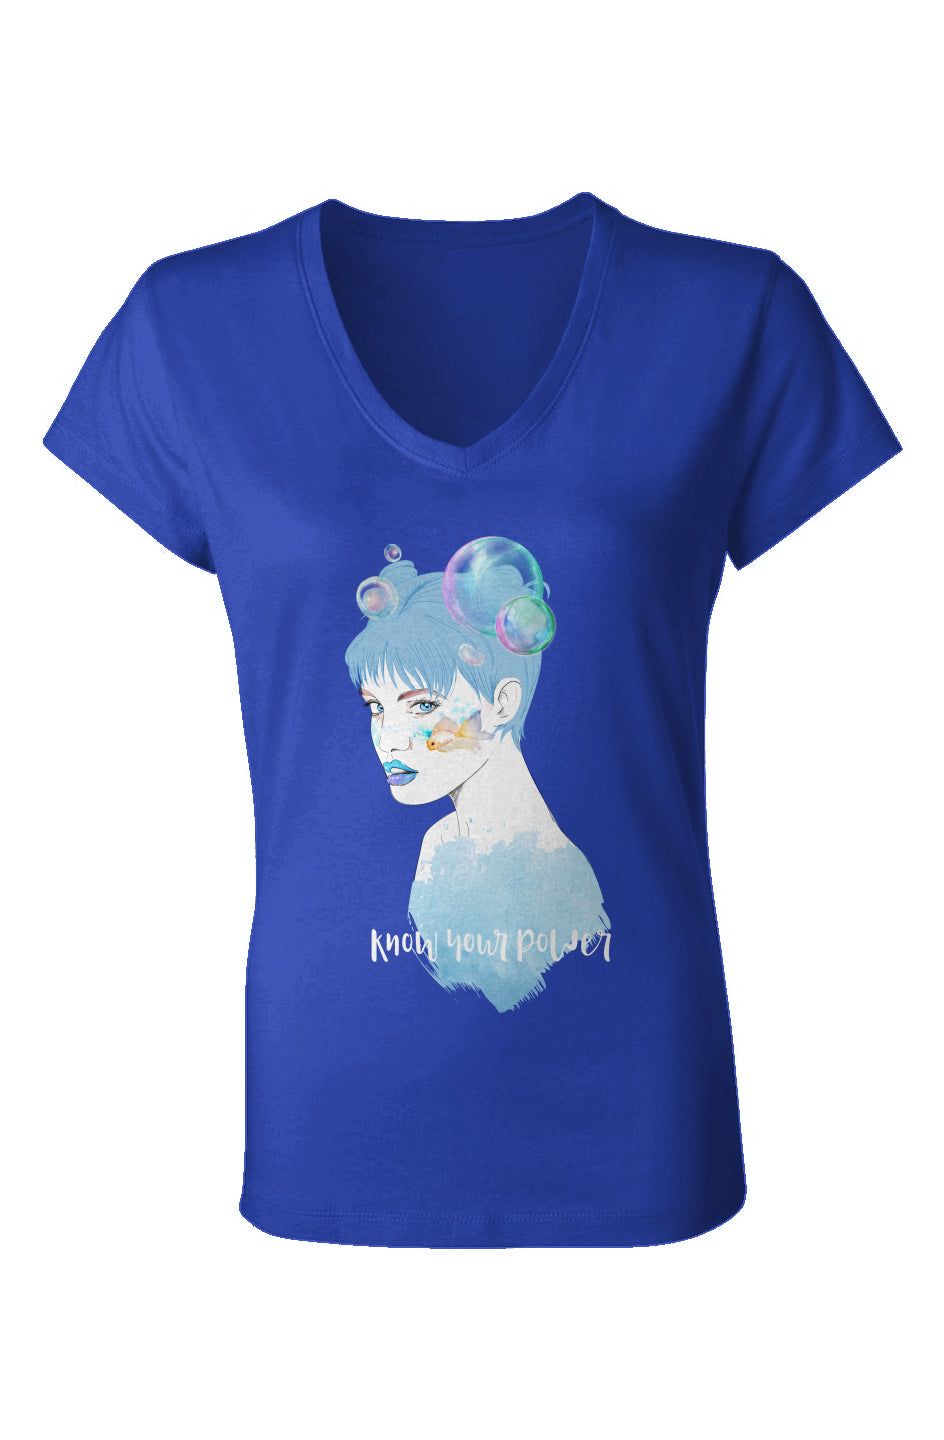 Women's Fit - "Know Your Power" V-Neck